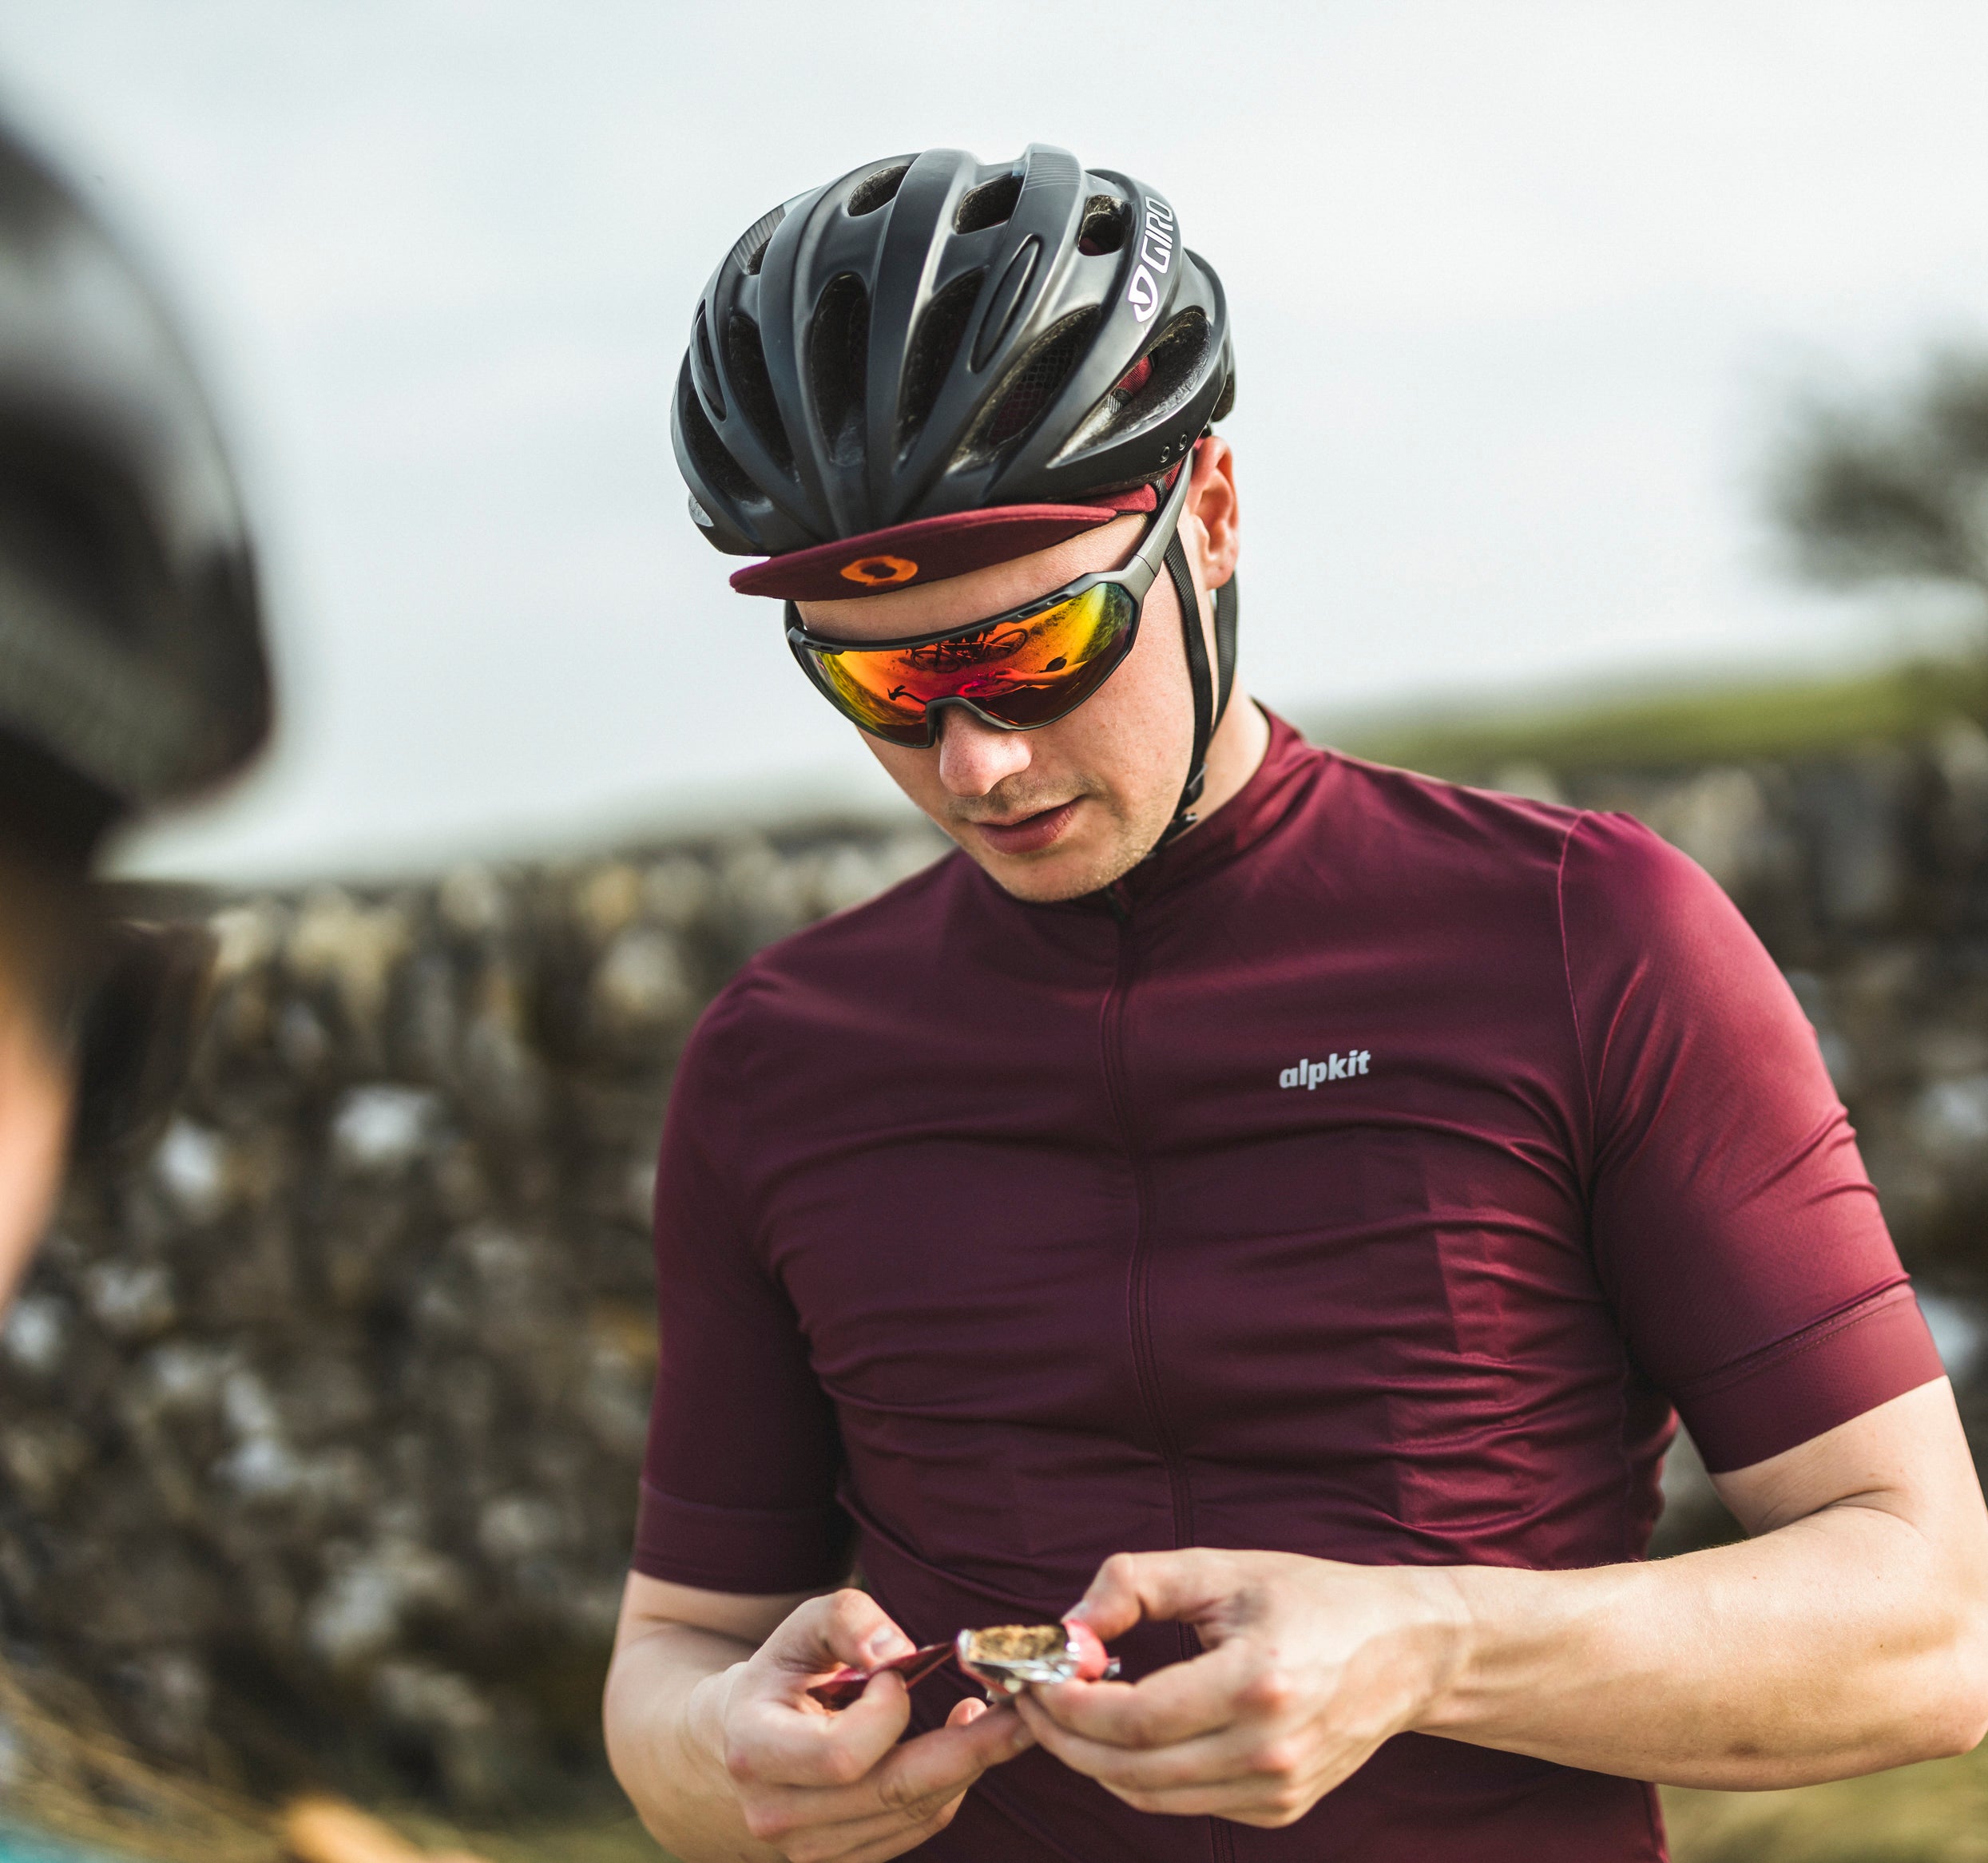 Men's Technical Cycle Clothing